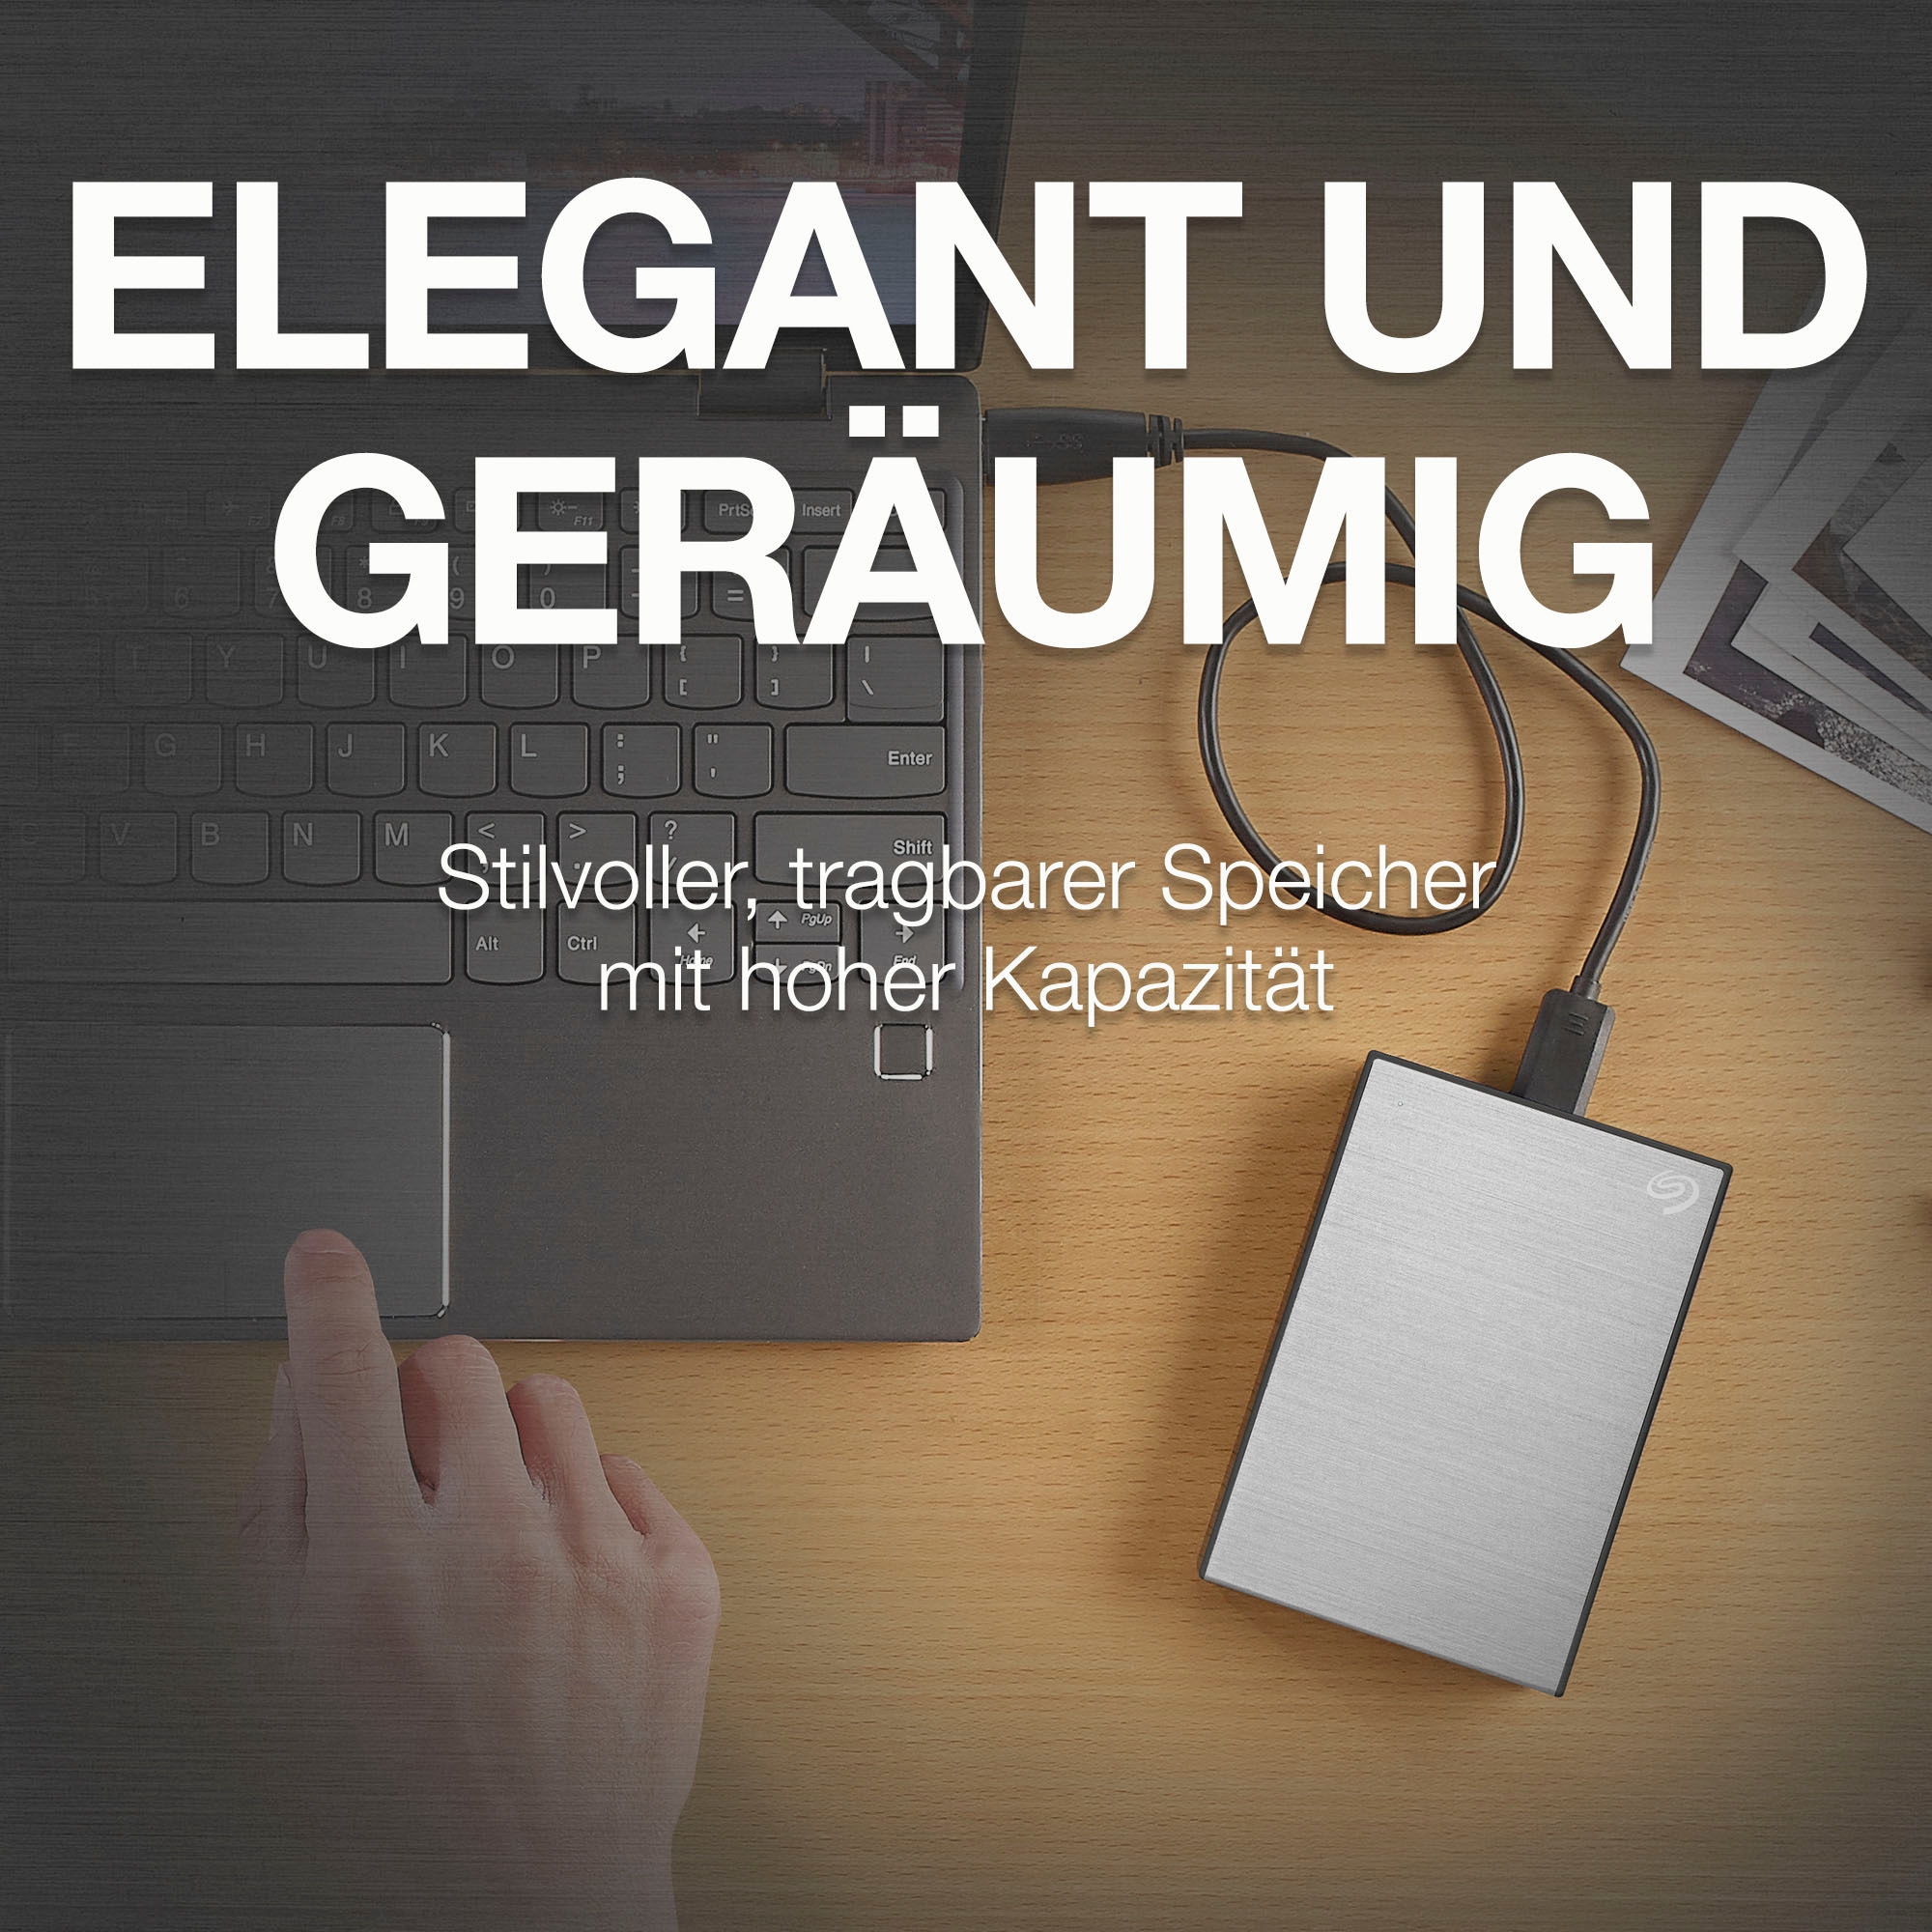 USB 3.2, Recovery ➥ 2 Seagate Services Data externe Garantie Jahre 1TB«, Inklusive »One Touch UNIVERSAL HDD-Festplatte 3 XXL Jahre | Drive Anschluss Zoll, 2,5 Rescue Portable